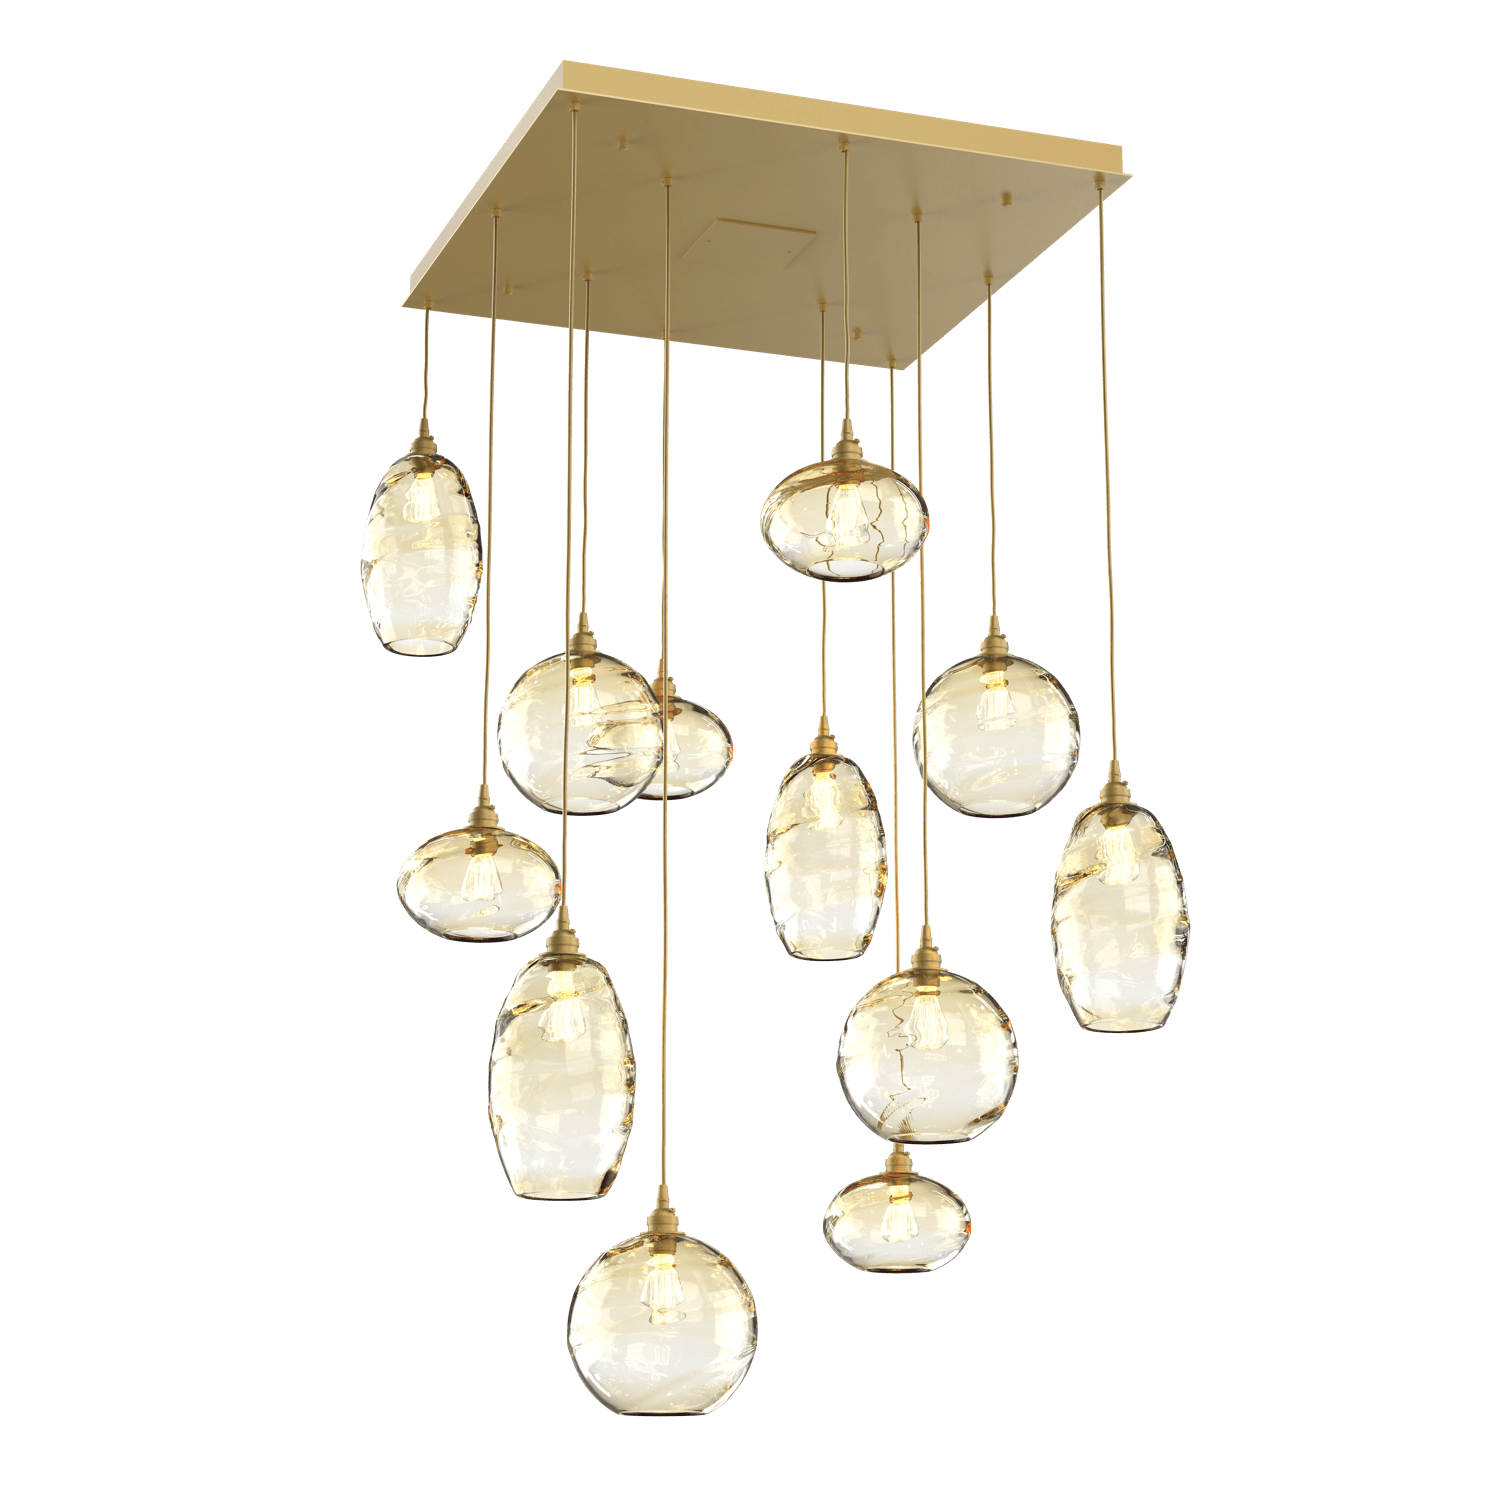 CHB0048-12-GB-OA-Hammerton-Studio-Optic-Blown-Glass-Misto-12-light-square-pendant-chandelier-with-gilded-brass-finish-and-optic-amber-blown-glass-shades-and-incandescent-lamping